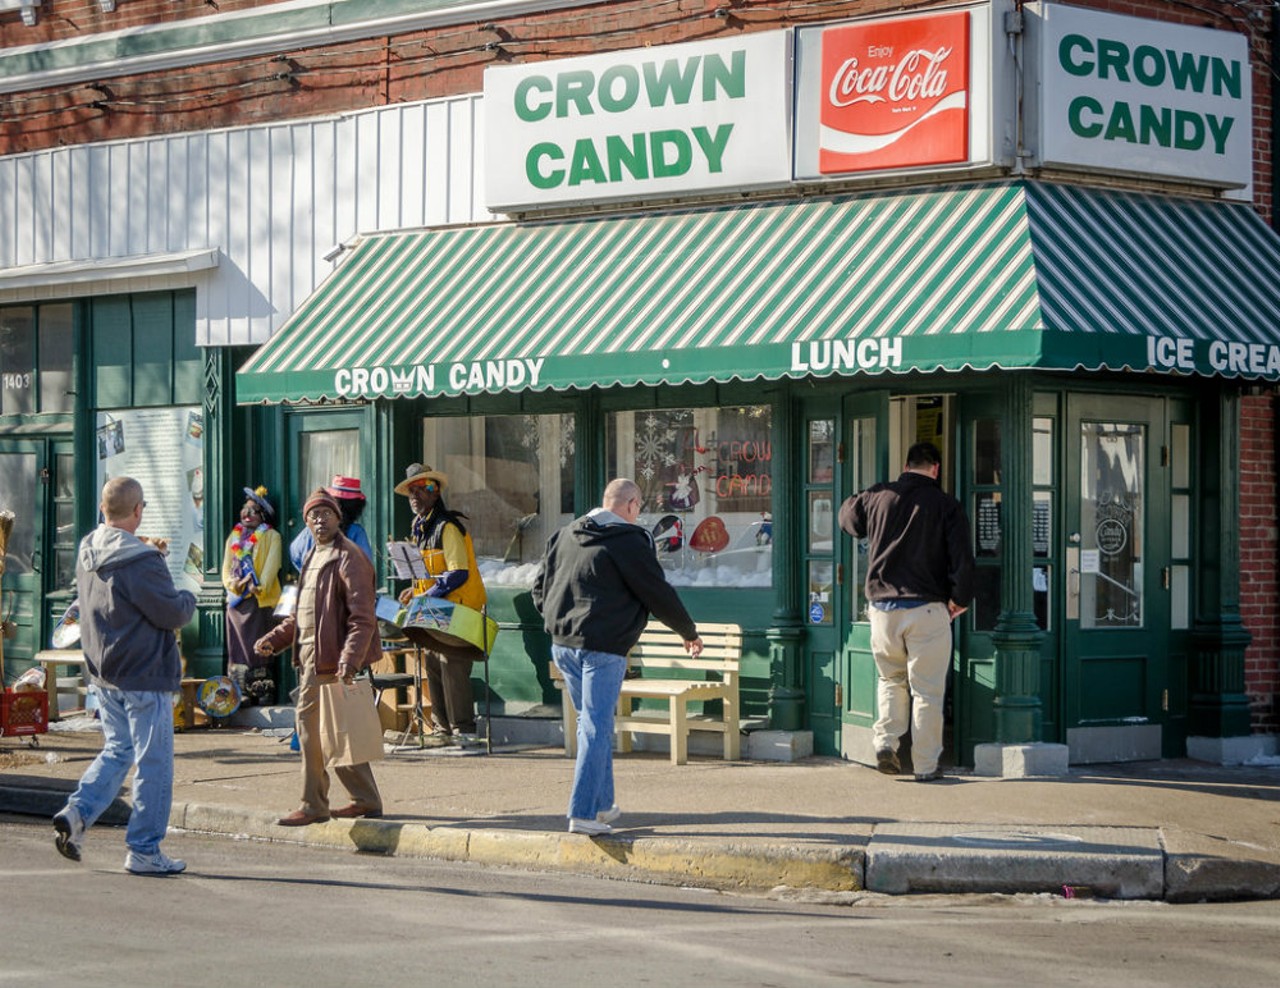  You consider Crown Candy Kitchen a historic building.
(1401 St. Louis Avenue, 314-621-9650)
The green stripes are iconic. The milkshakes? Even more so. 
Photo credit: Flickr / Keith Yahl